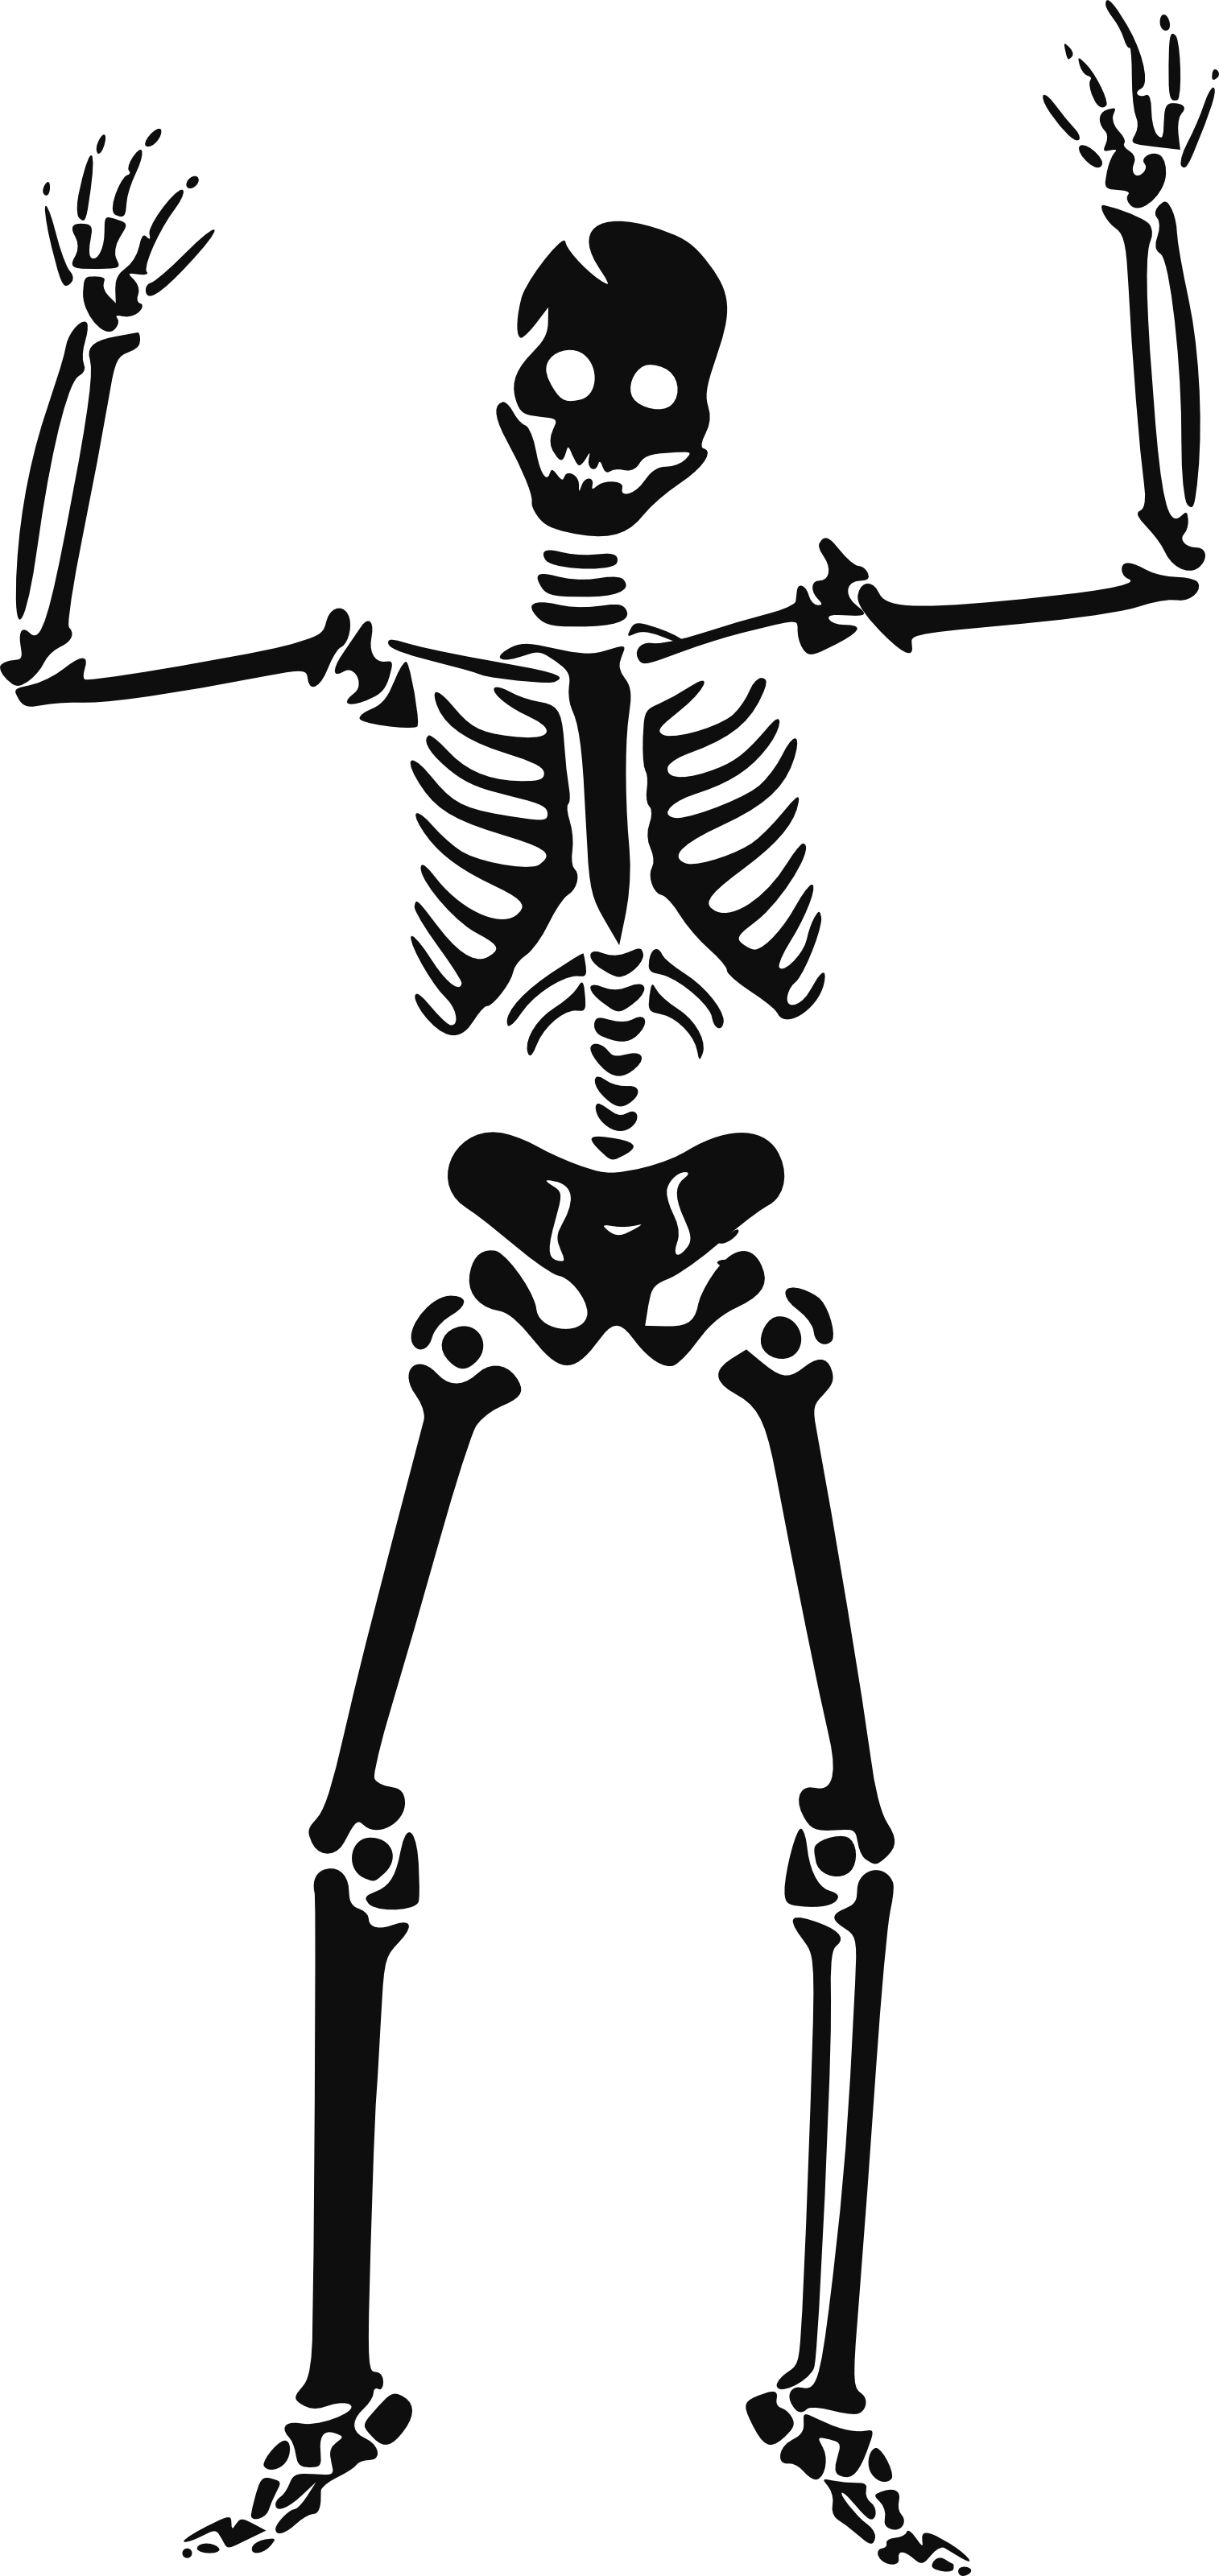 Halloween Skeleton Images Image Hd Photo Clipart